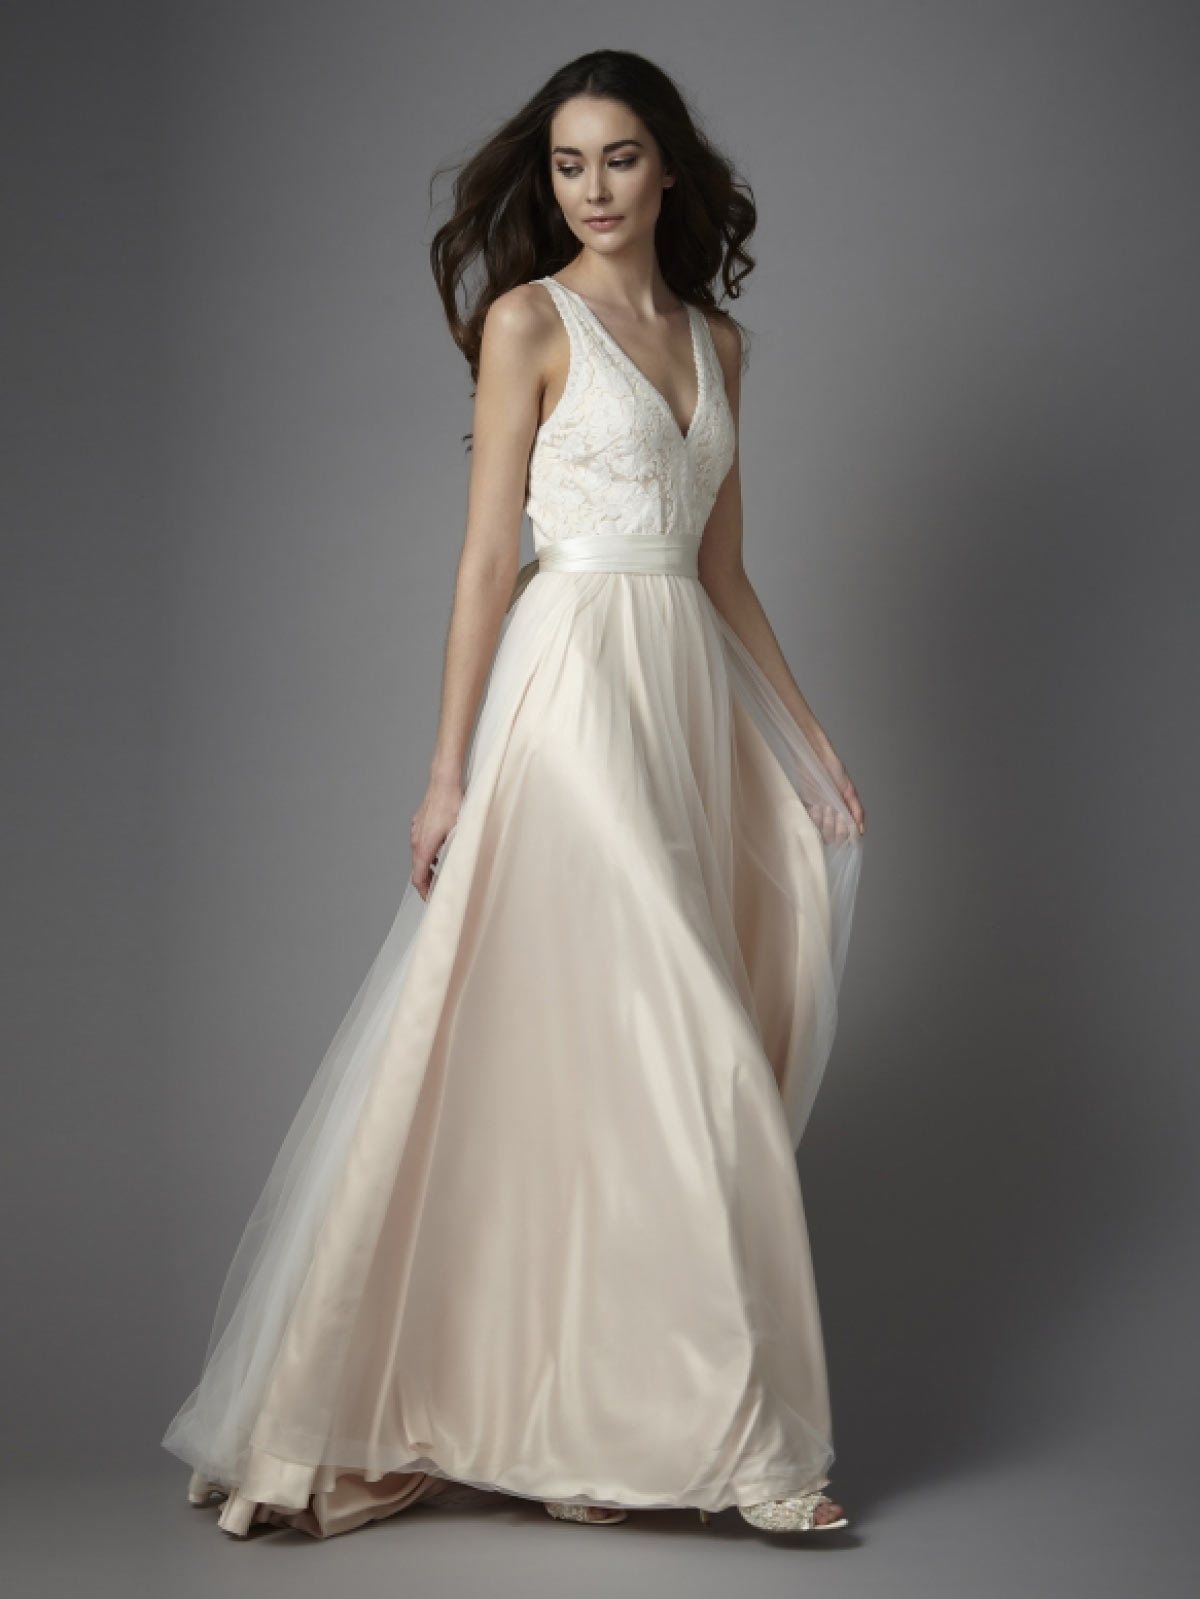 Gorgeous new gowns at The Ivory Secret